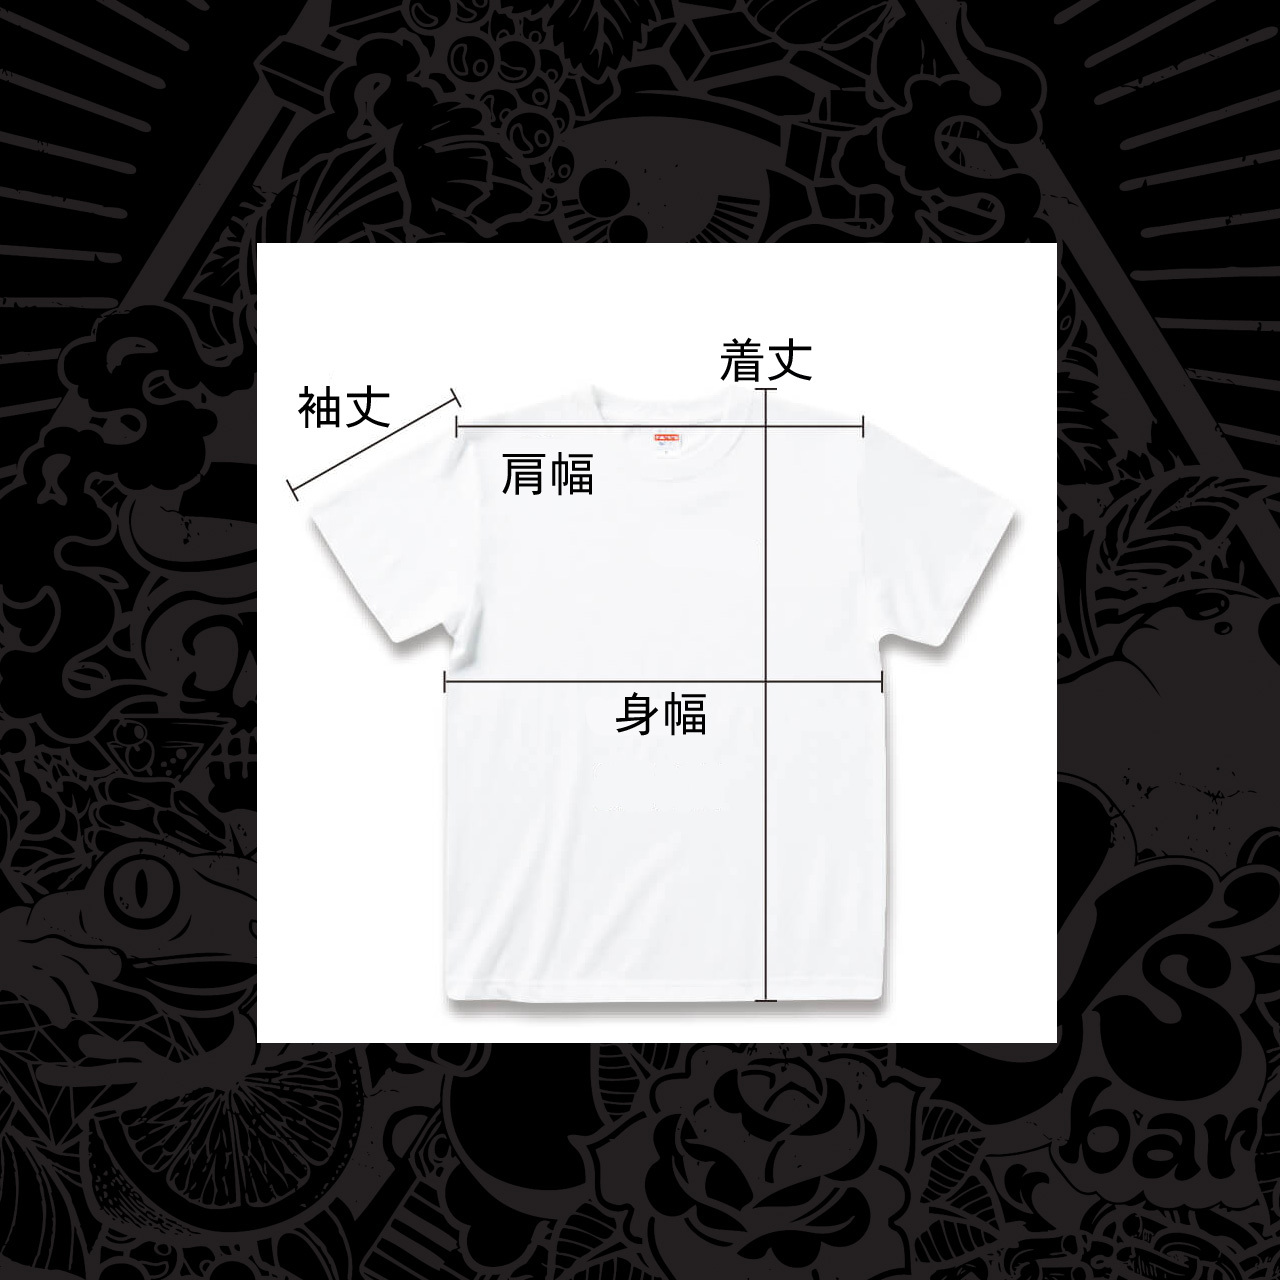 Nony S Bar First Big Silhouette Tshirts Nony S Bar Elements 通販サイト